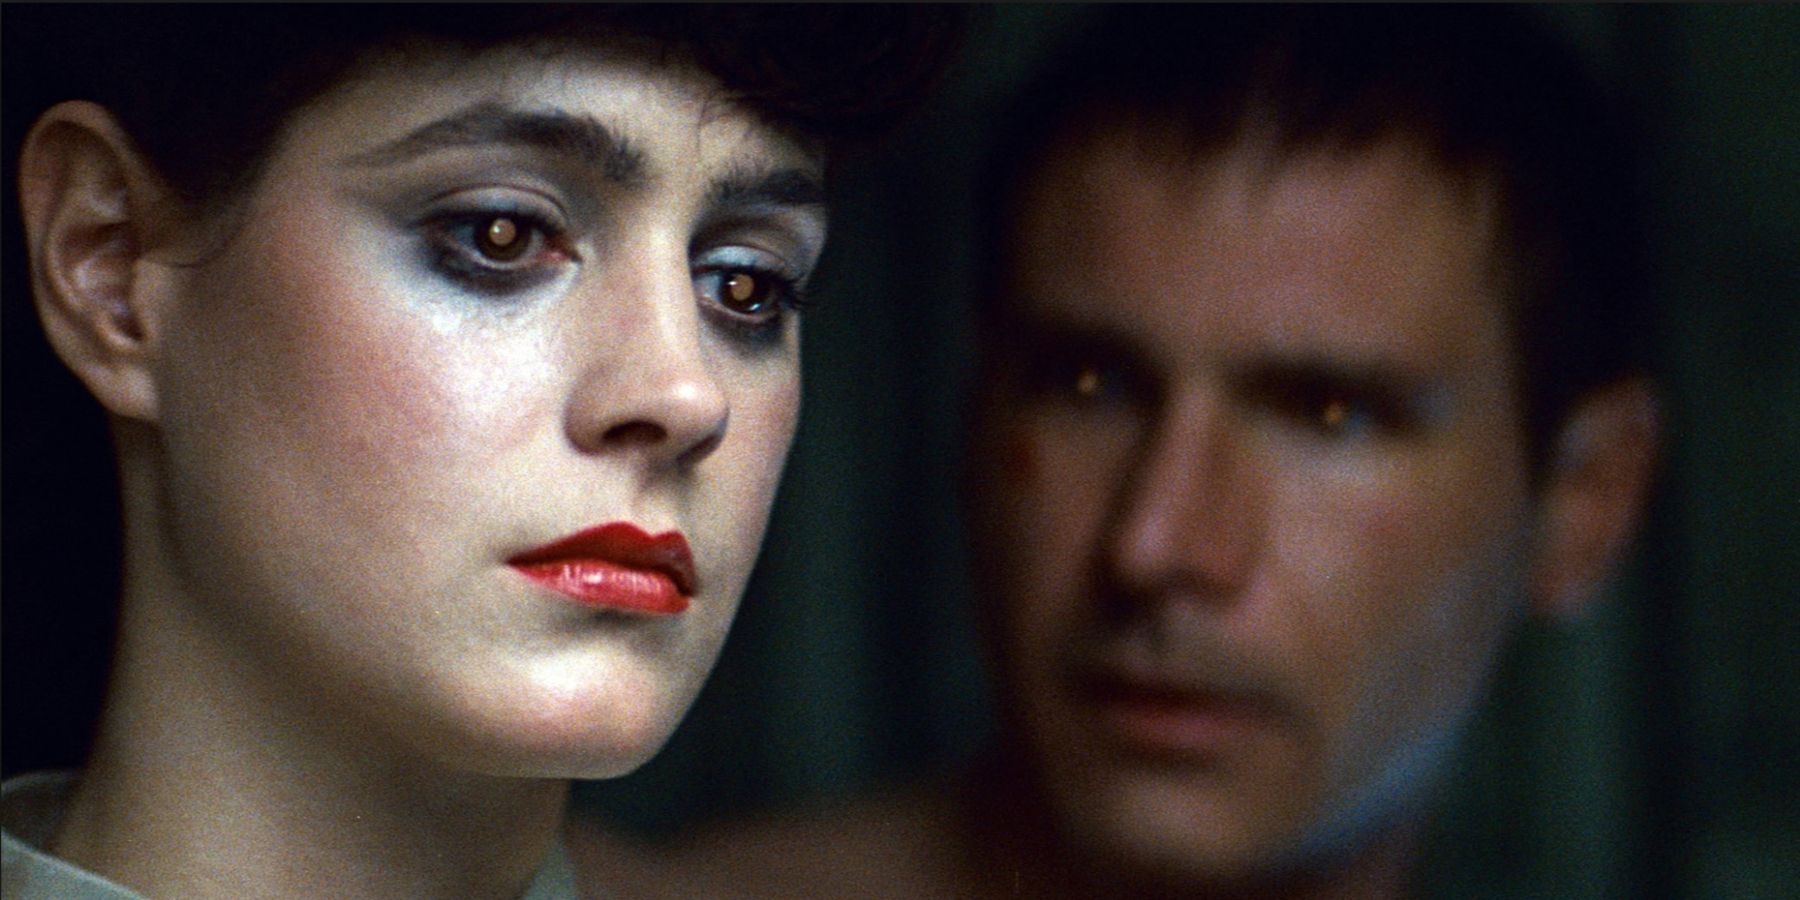 Sean Young plays Rachael - next to her is Harrison Ford's Rick Deckard